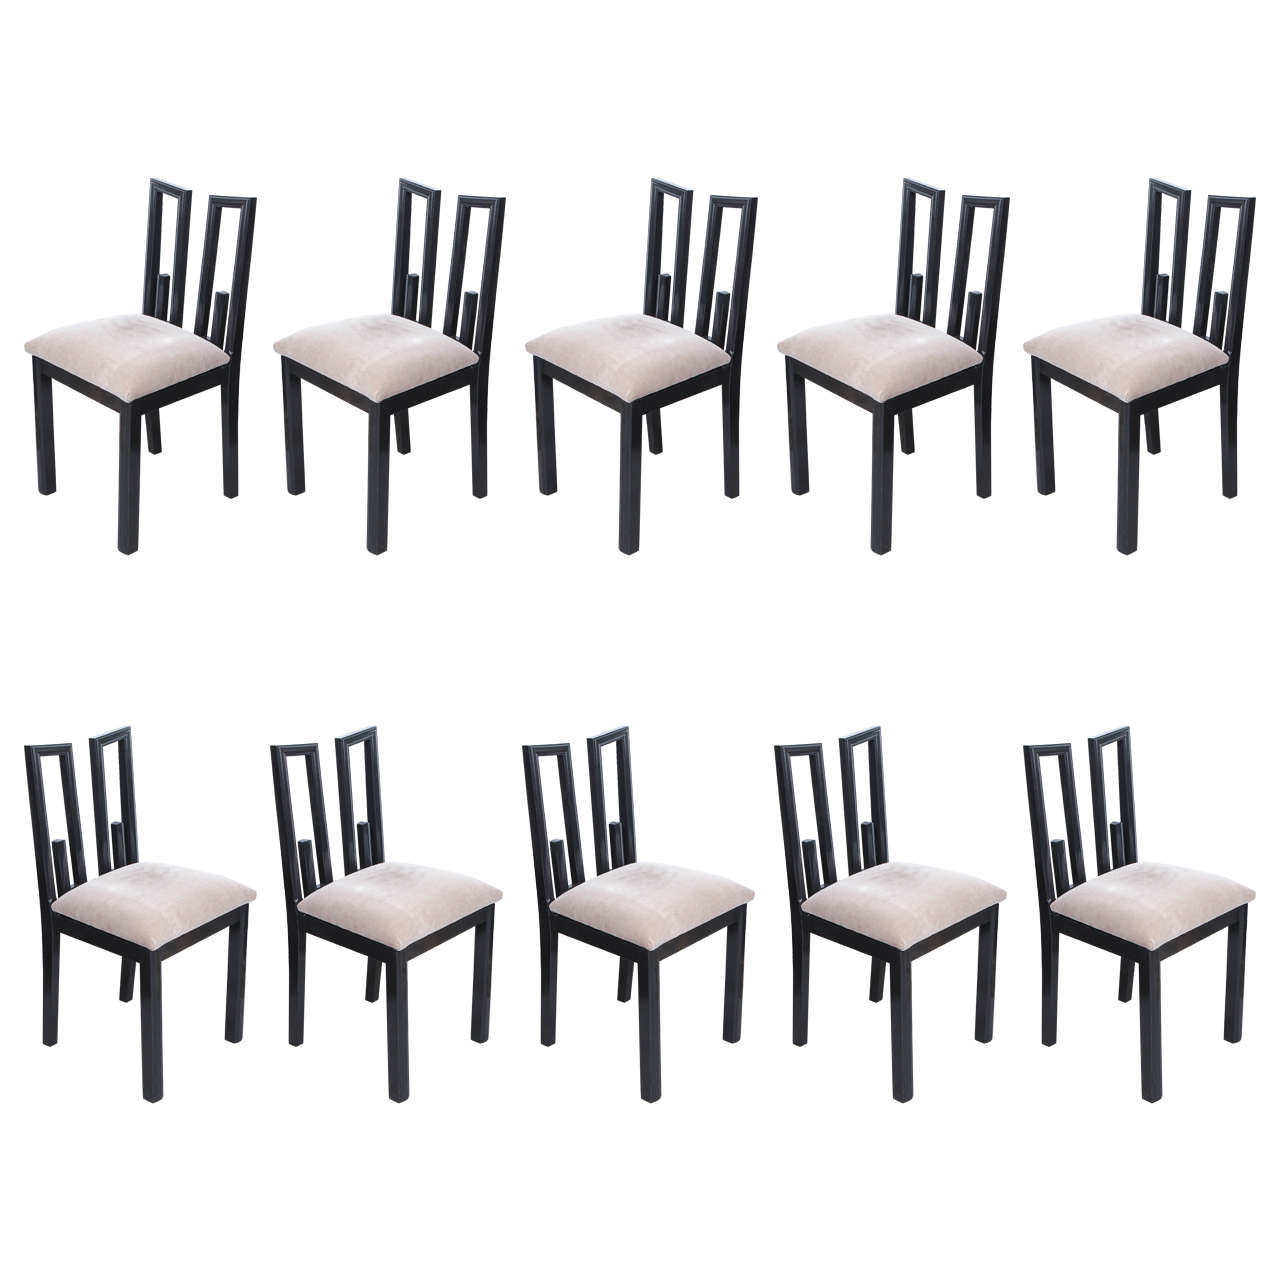 Set of Ten Greek Key Dining Chairs by James Mont